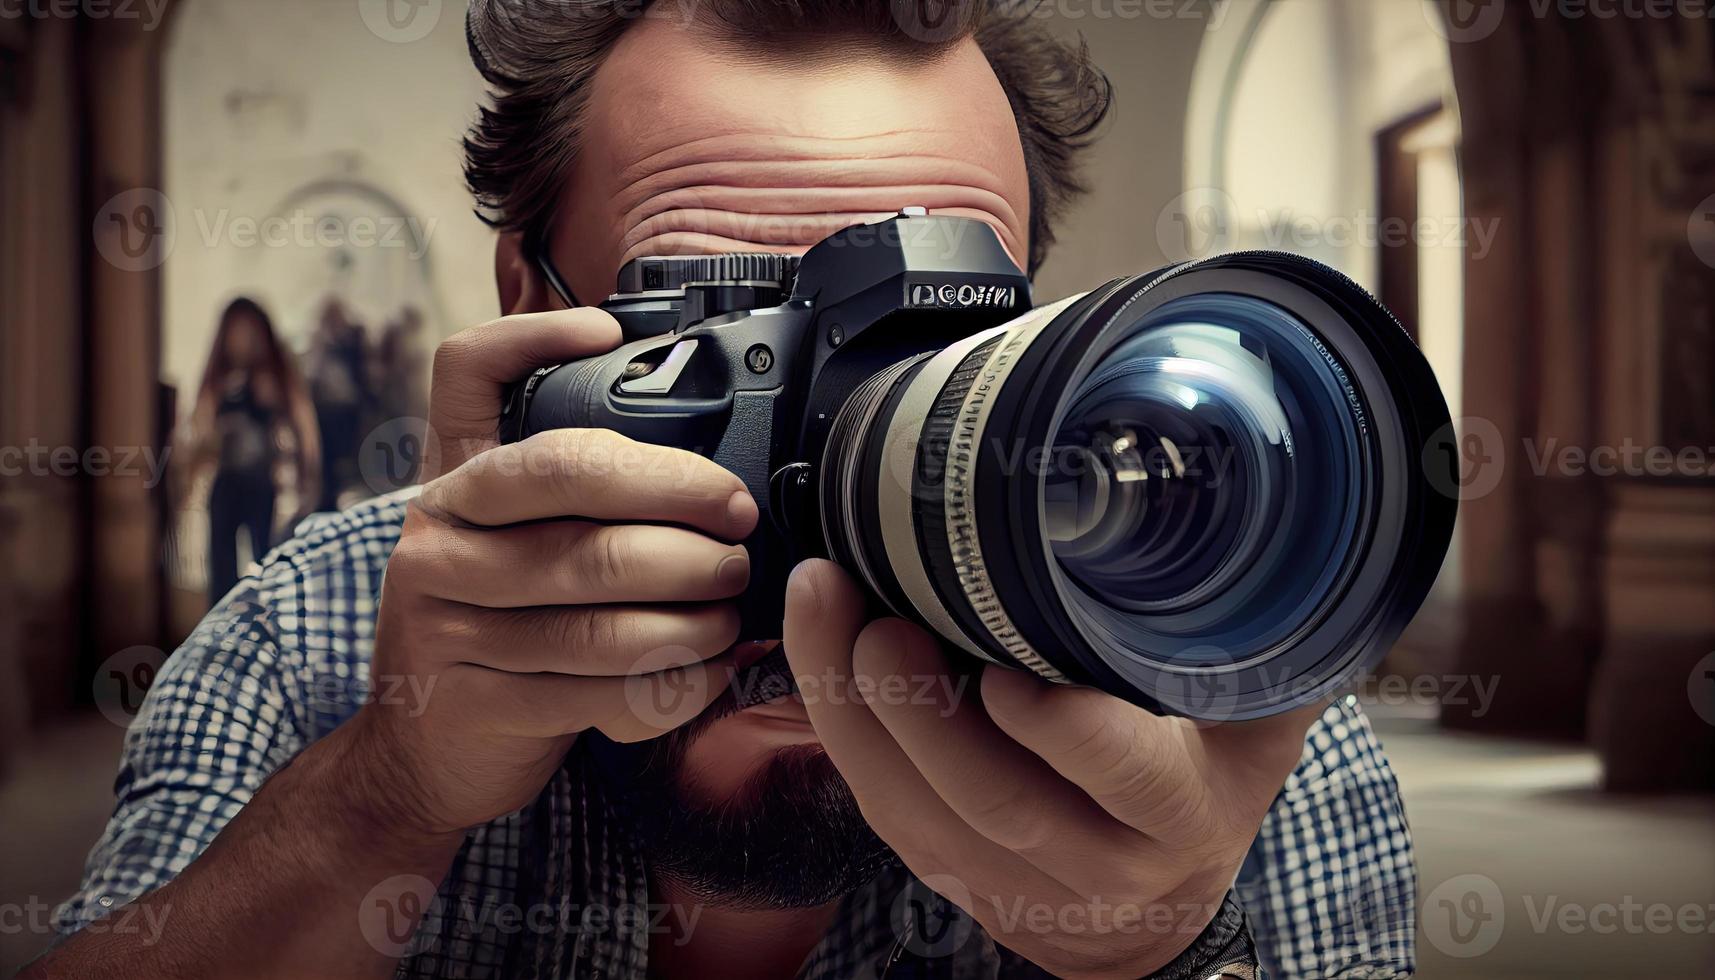 Camera World Photography Day, the beauty of an image photo